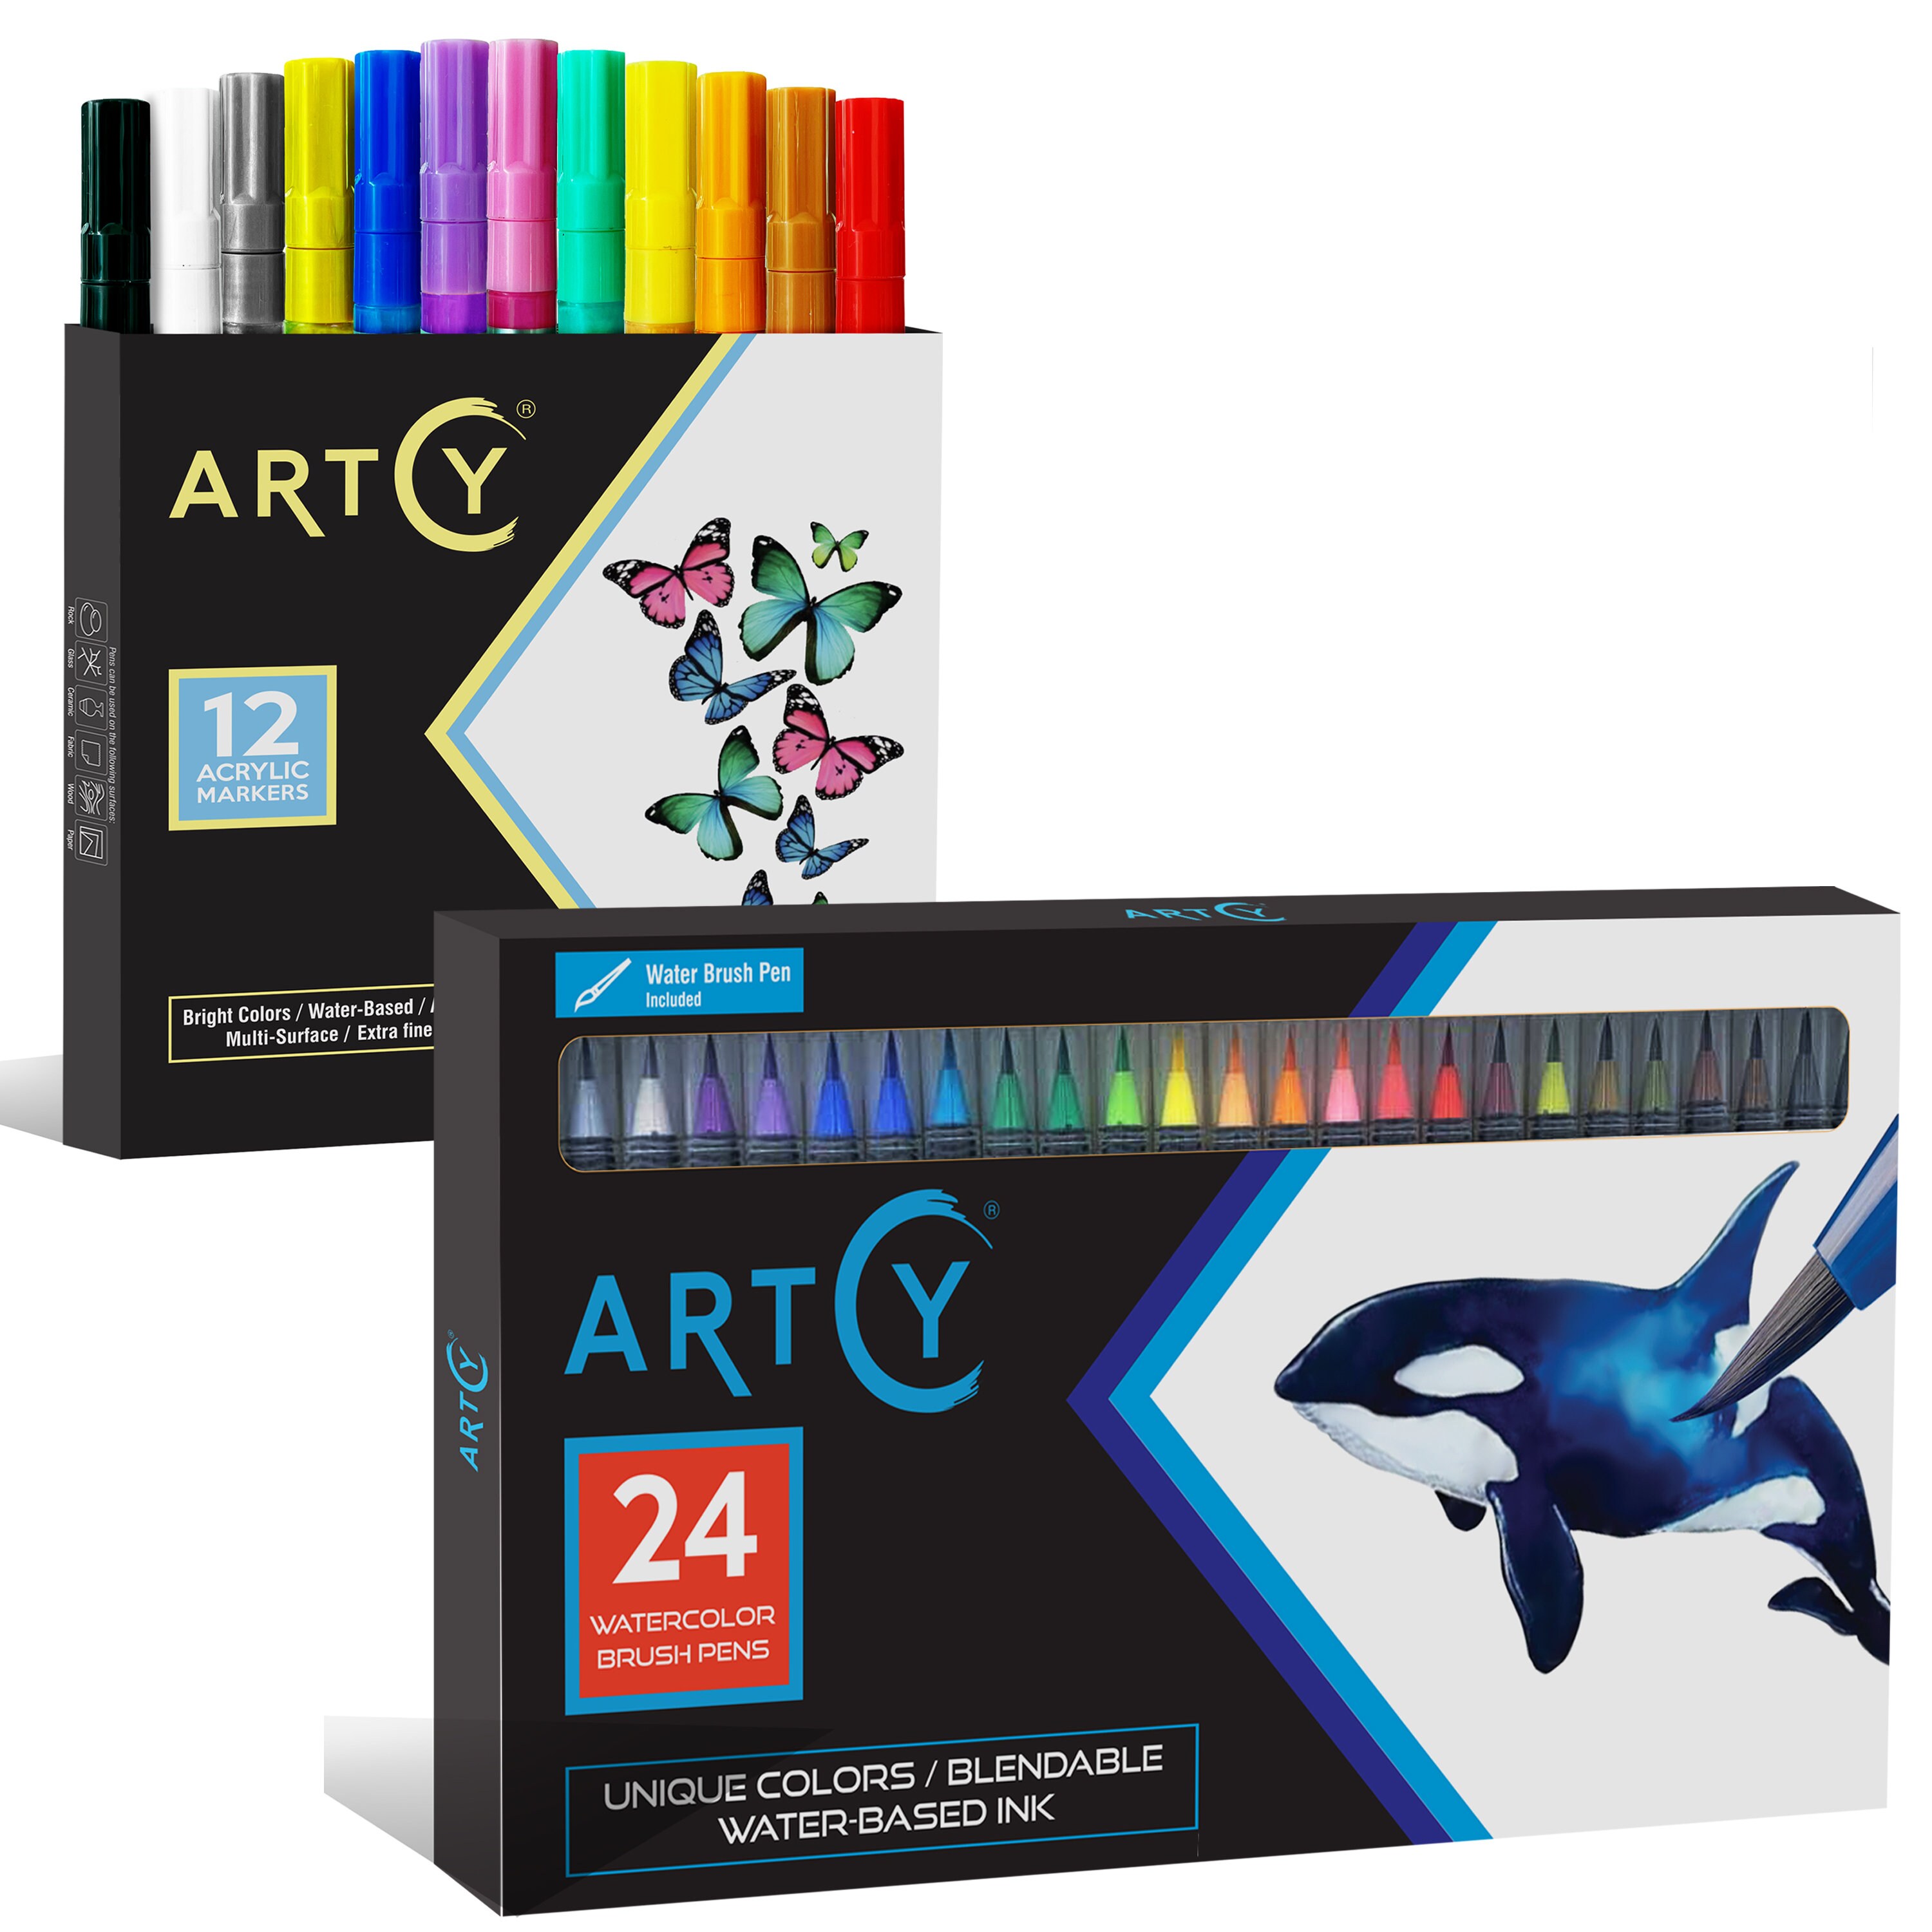 KINGART® PRO Extra Fine Point Acrylic Paint Pen Markers, Water-Based Ink,  Set of 12 Colors in 2023